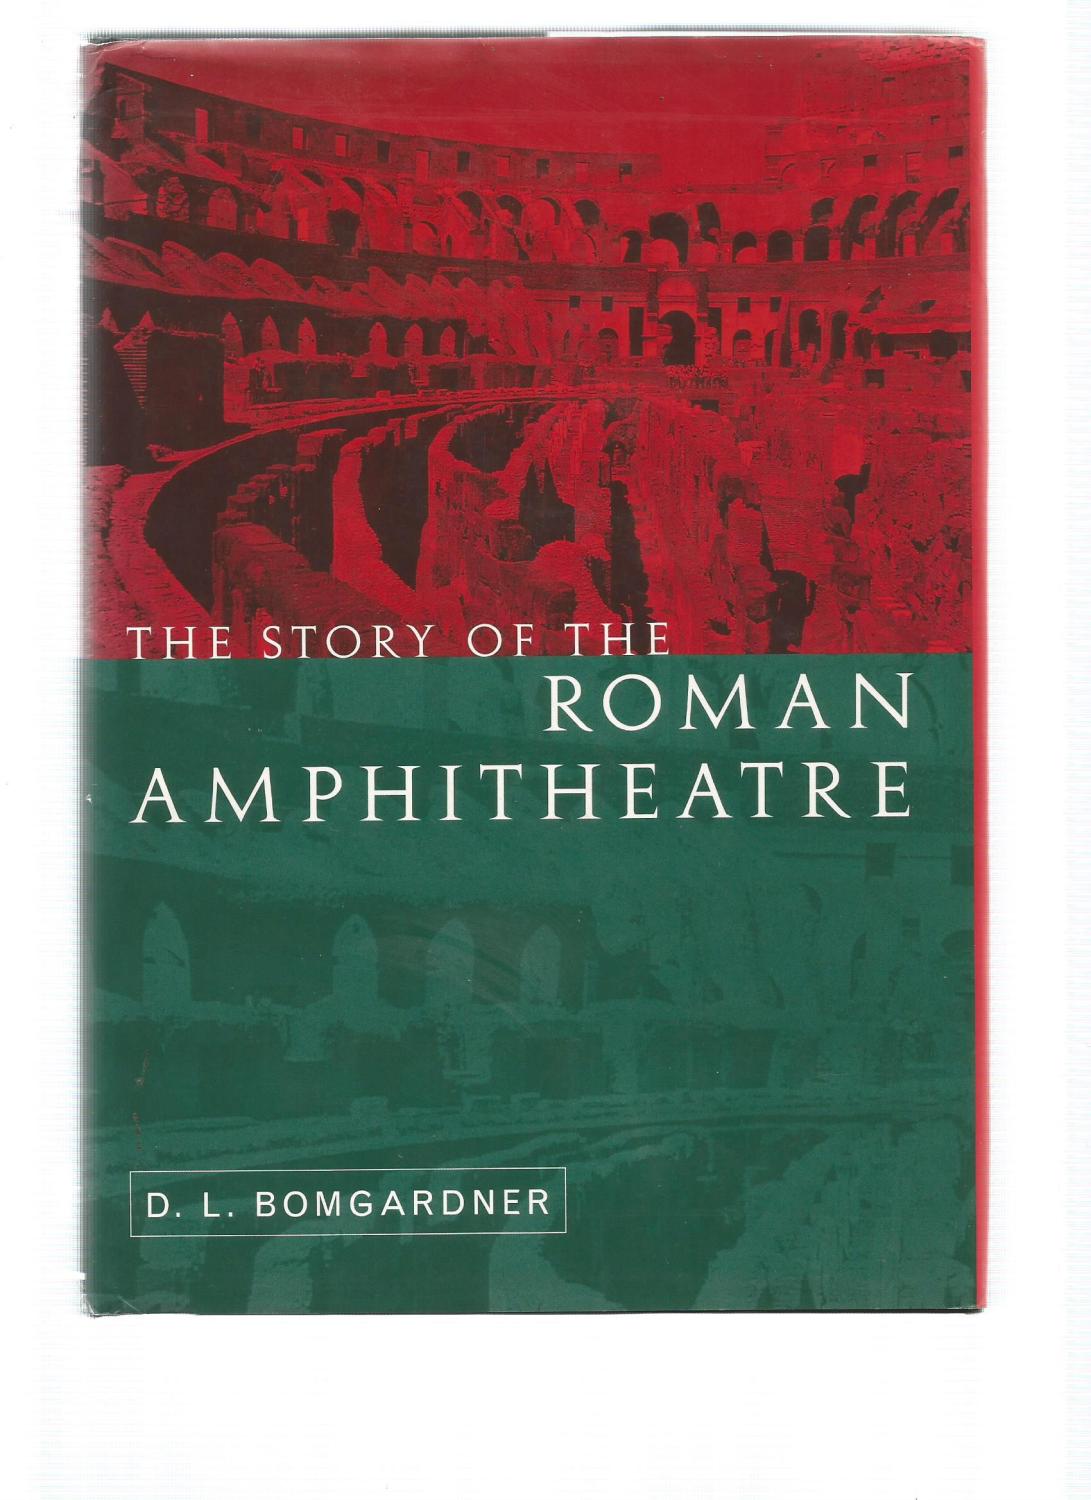 THE STORY OF THE ROMAN AMPHITHEATRE - BOMGARDNER, D L